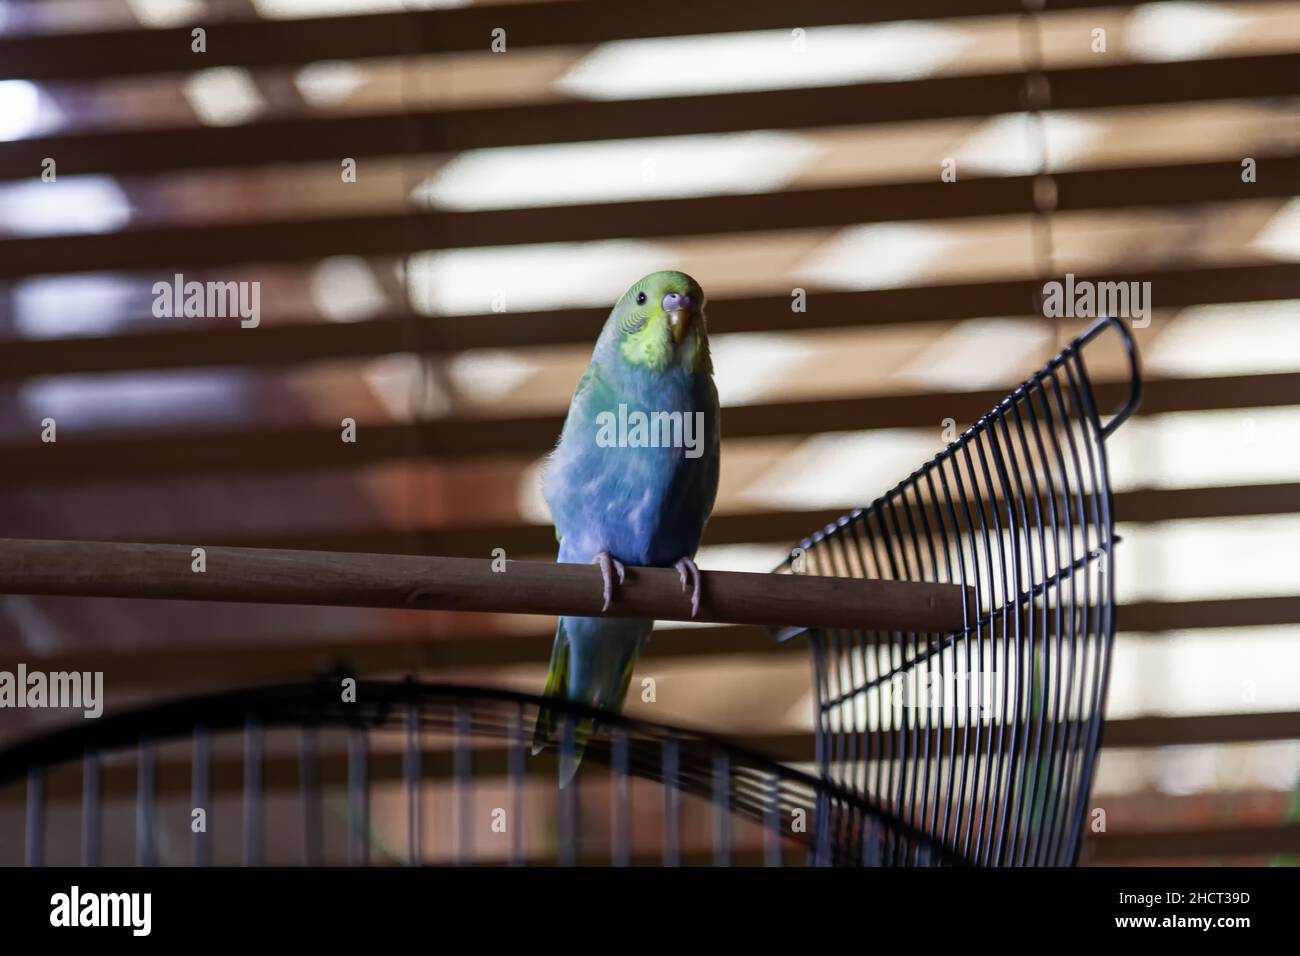 Cool budgie in contemporary setting with banded shadows Stock Photo